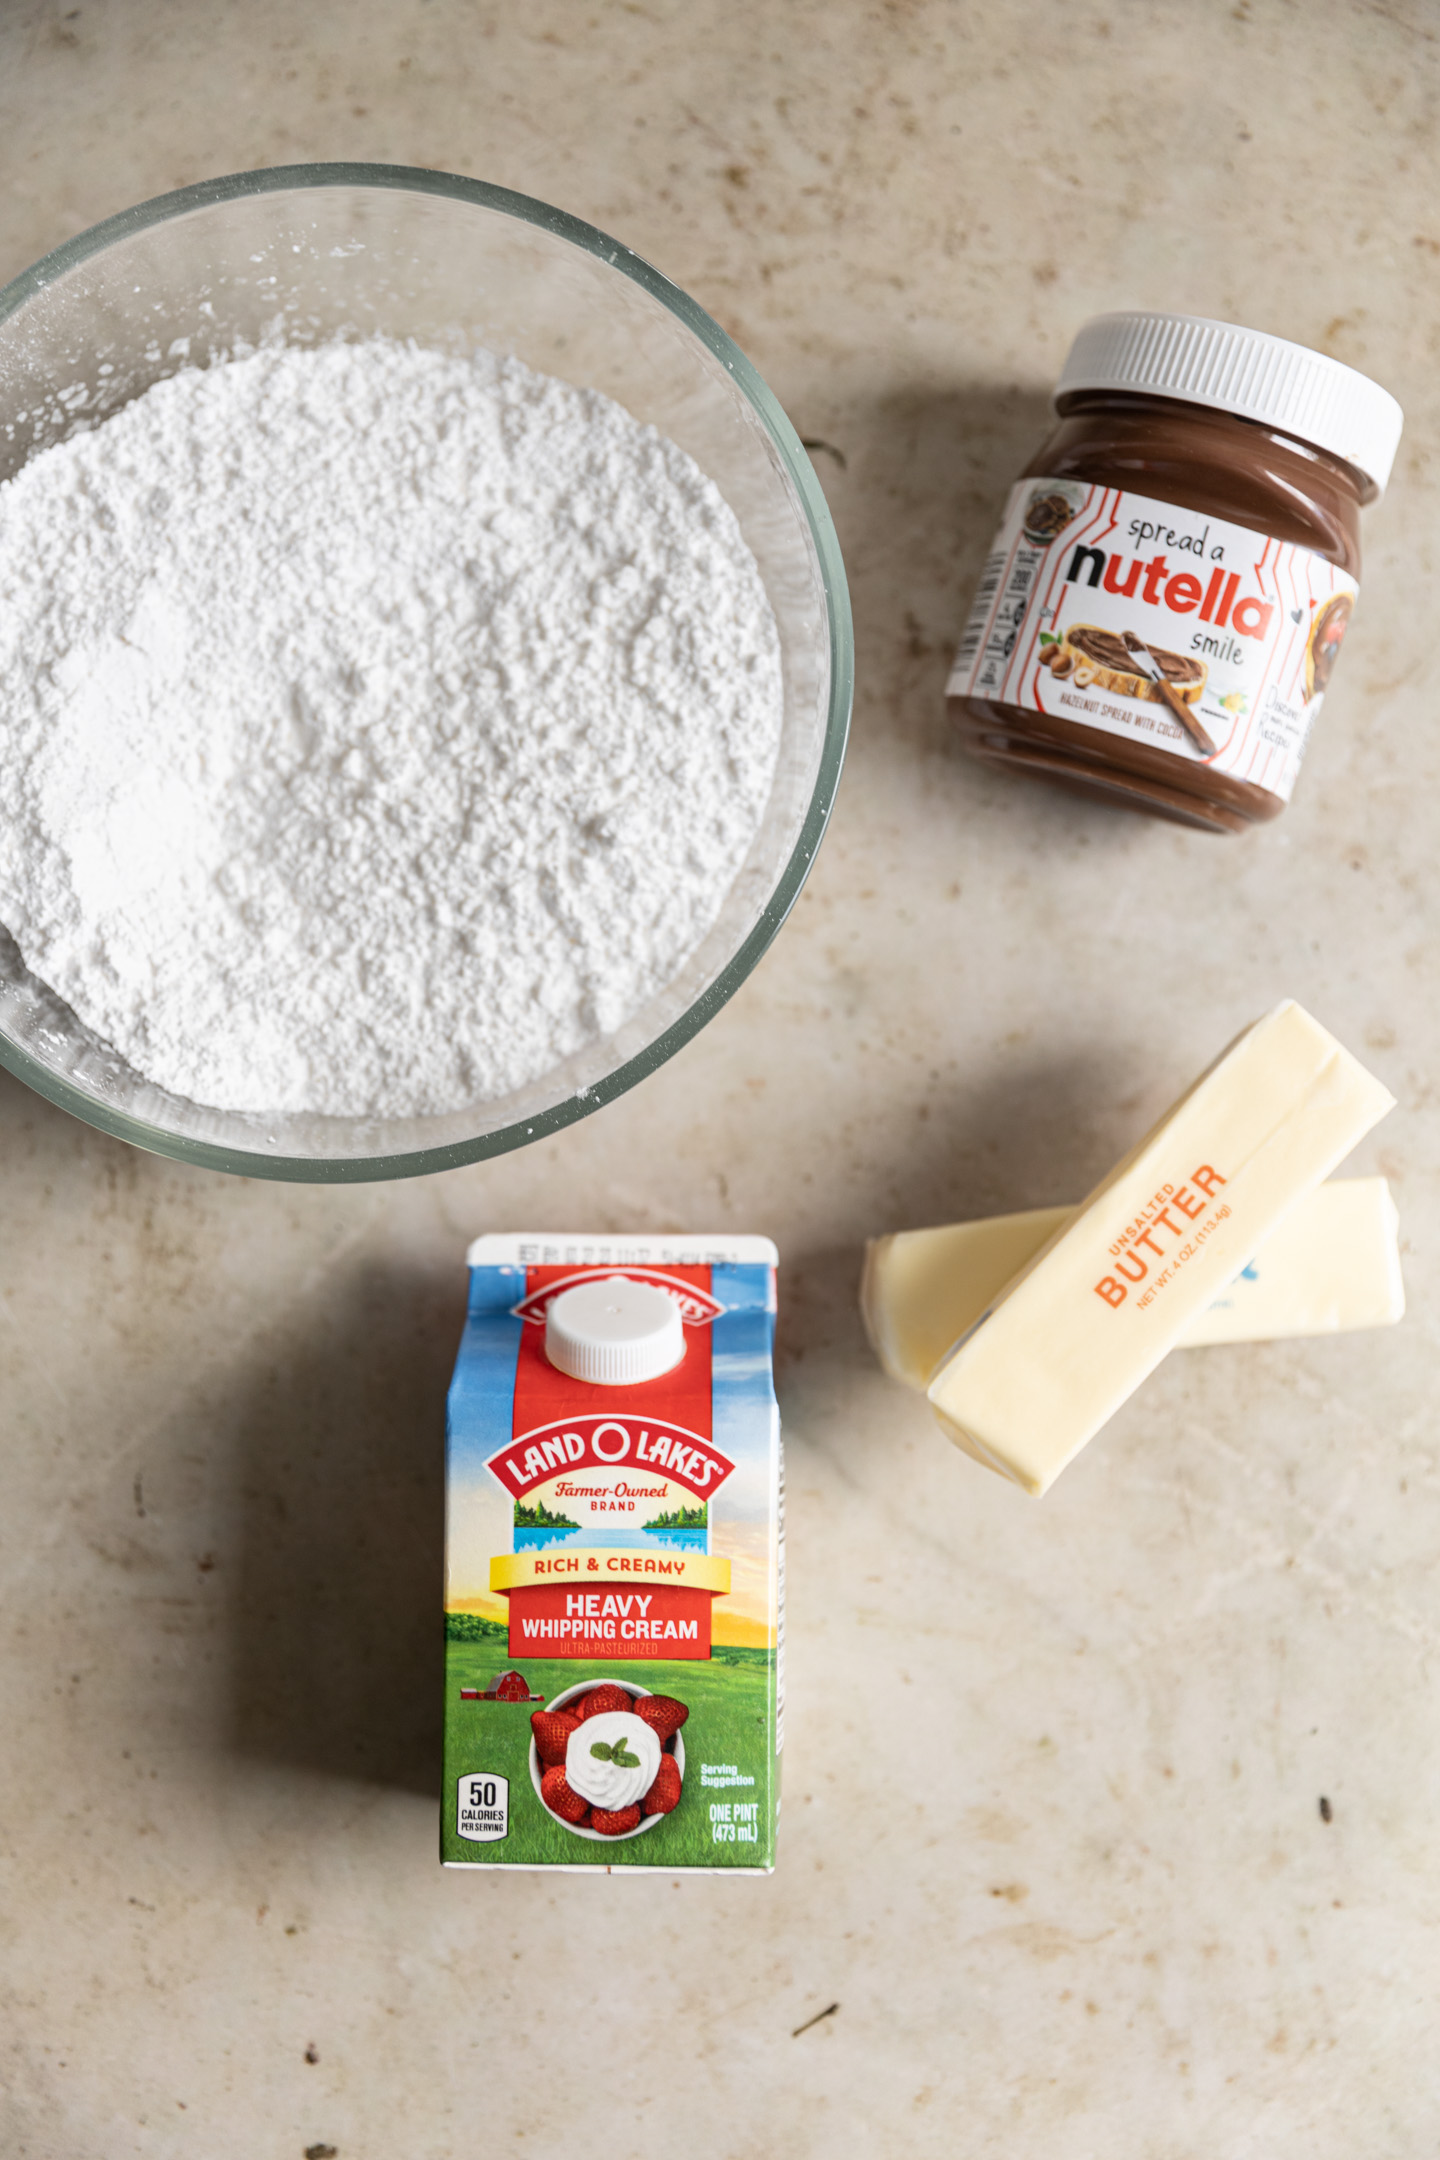 Ingredients for Nutella Frosting.